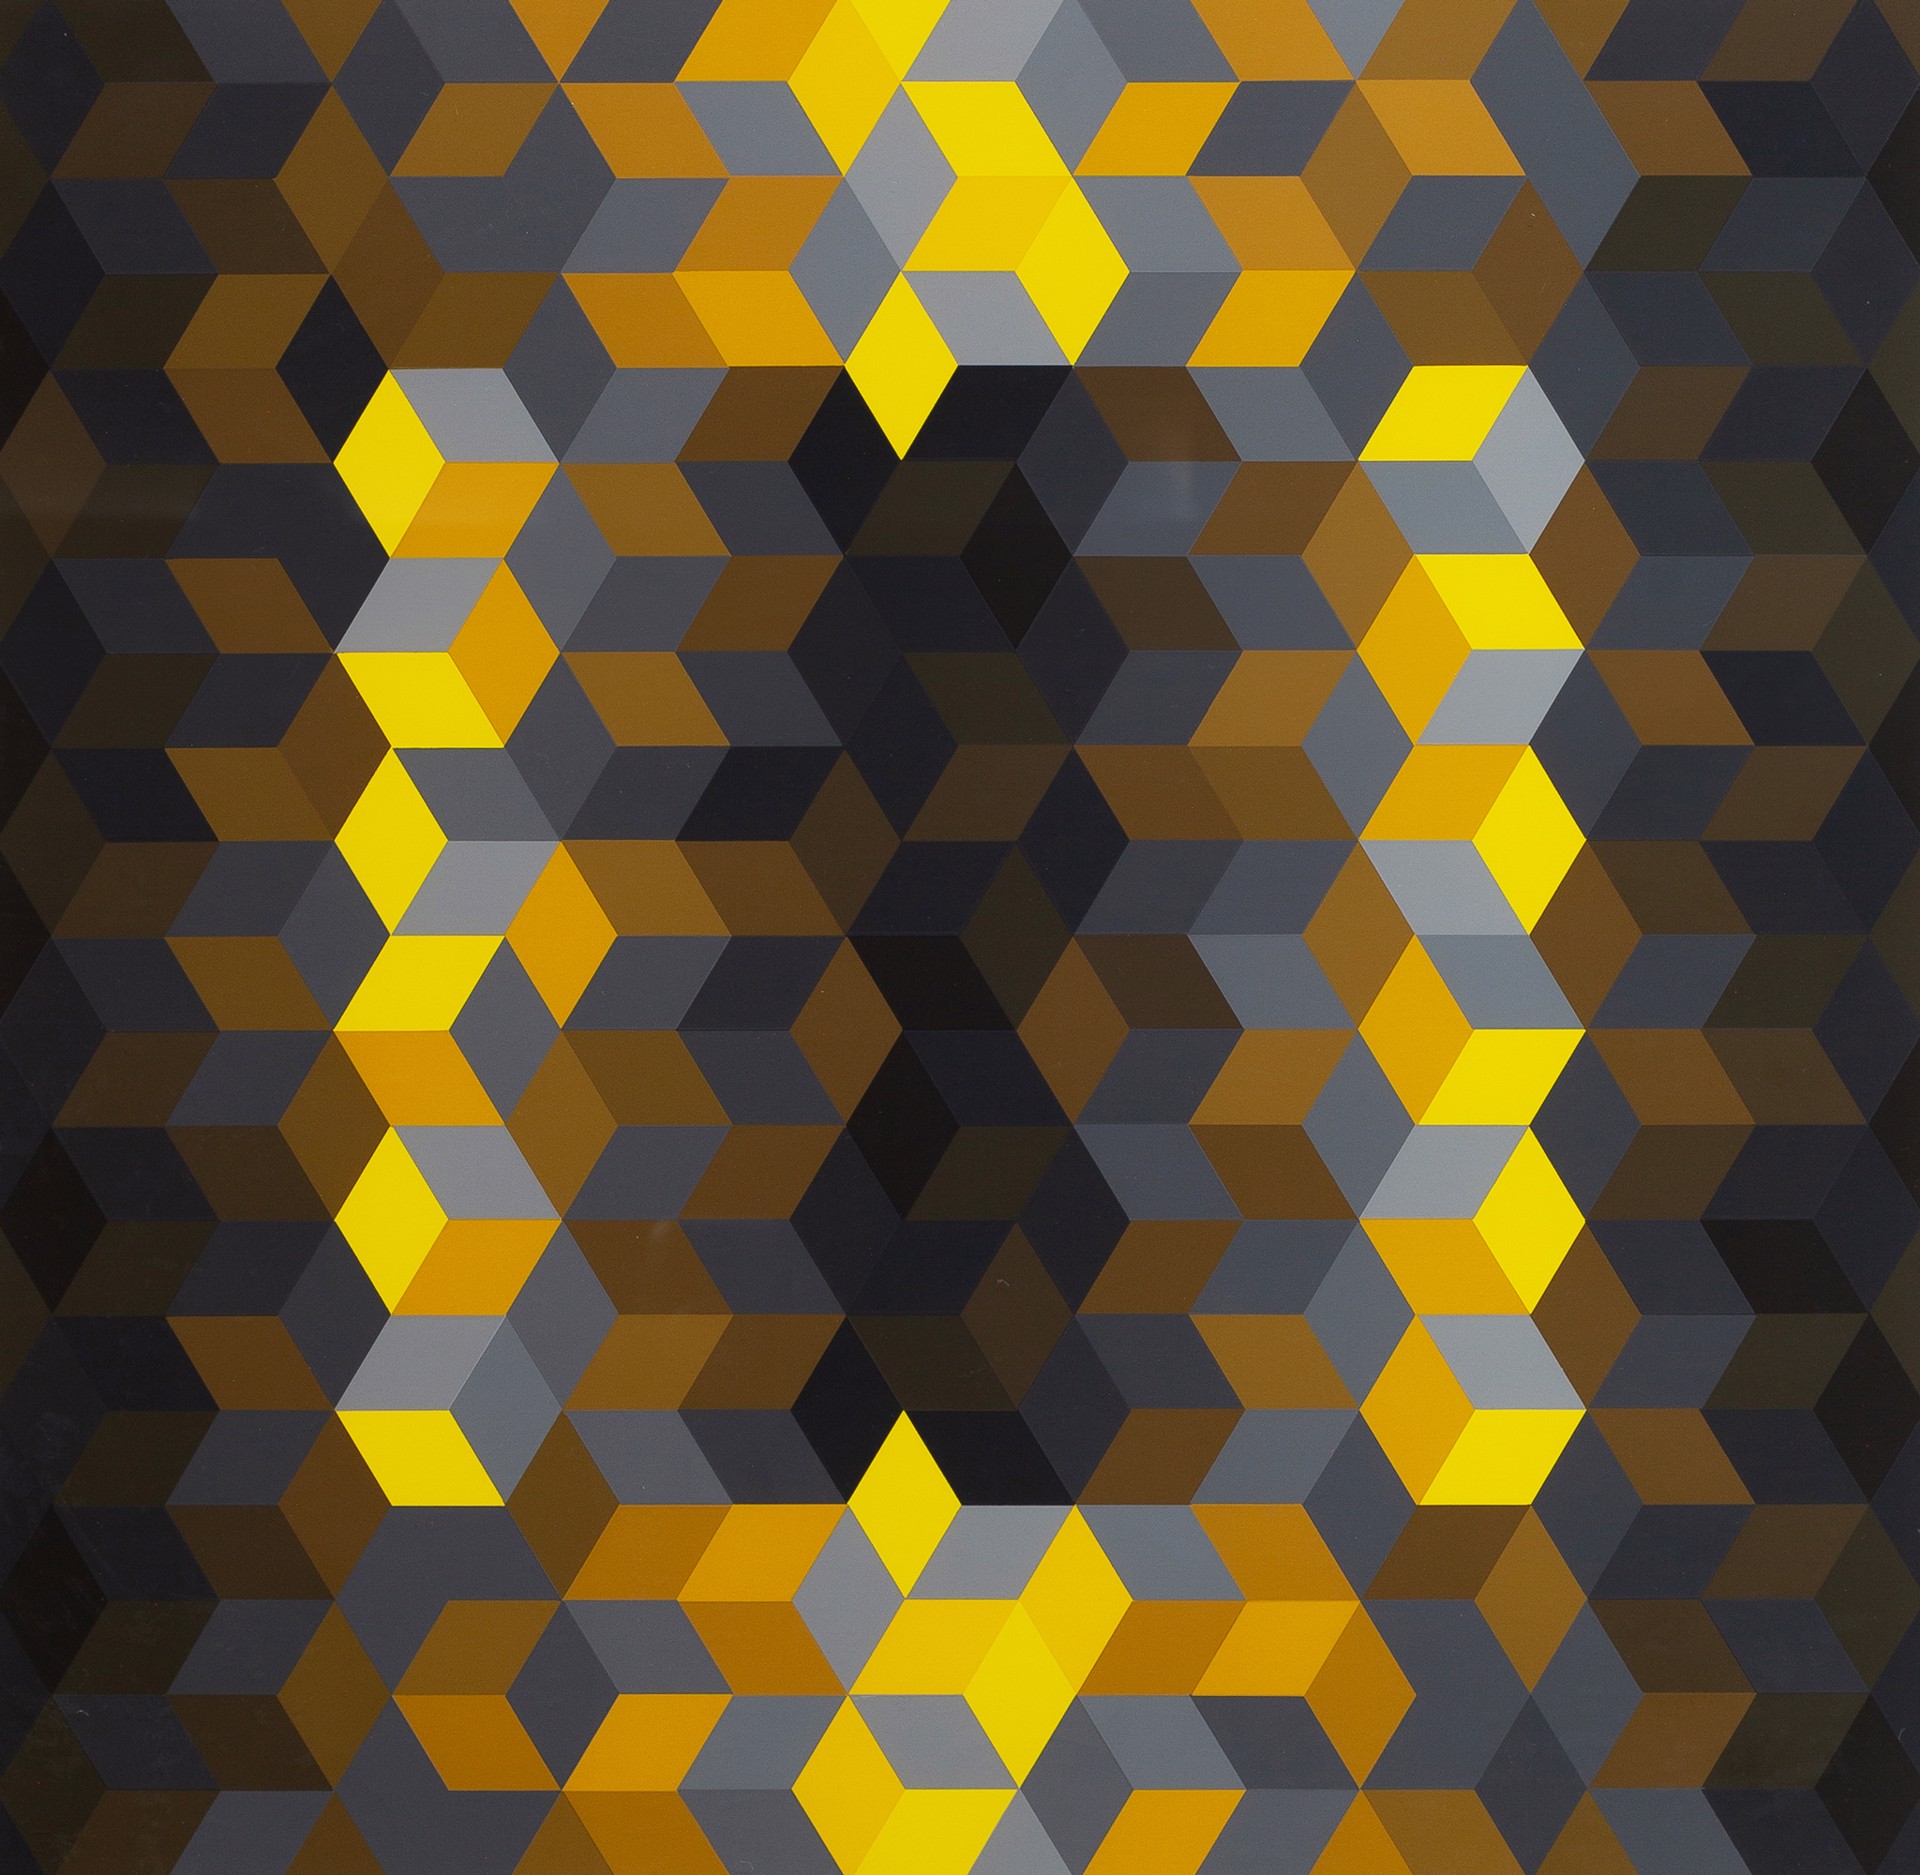 Ion 7 (from Hommage a L’Hexagone) by Victor Vasarely